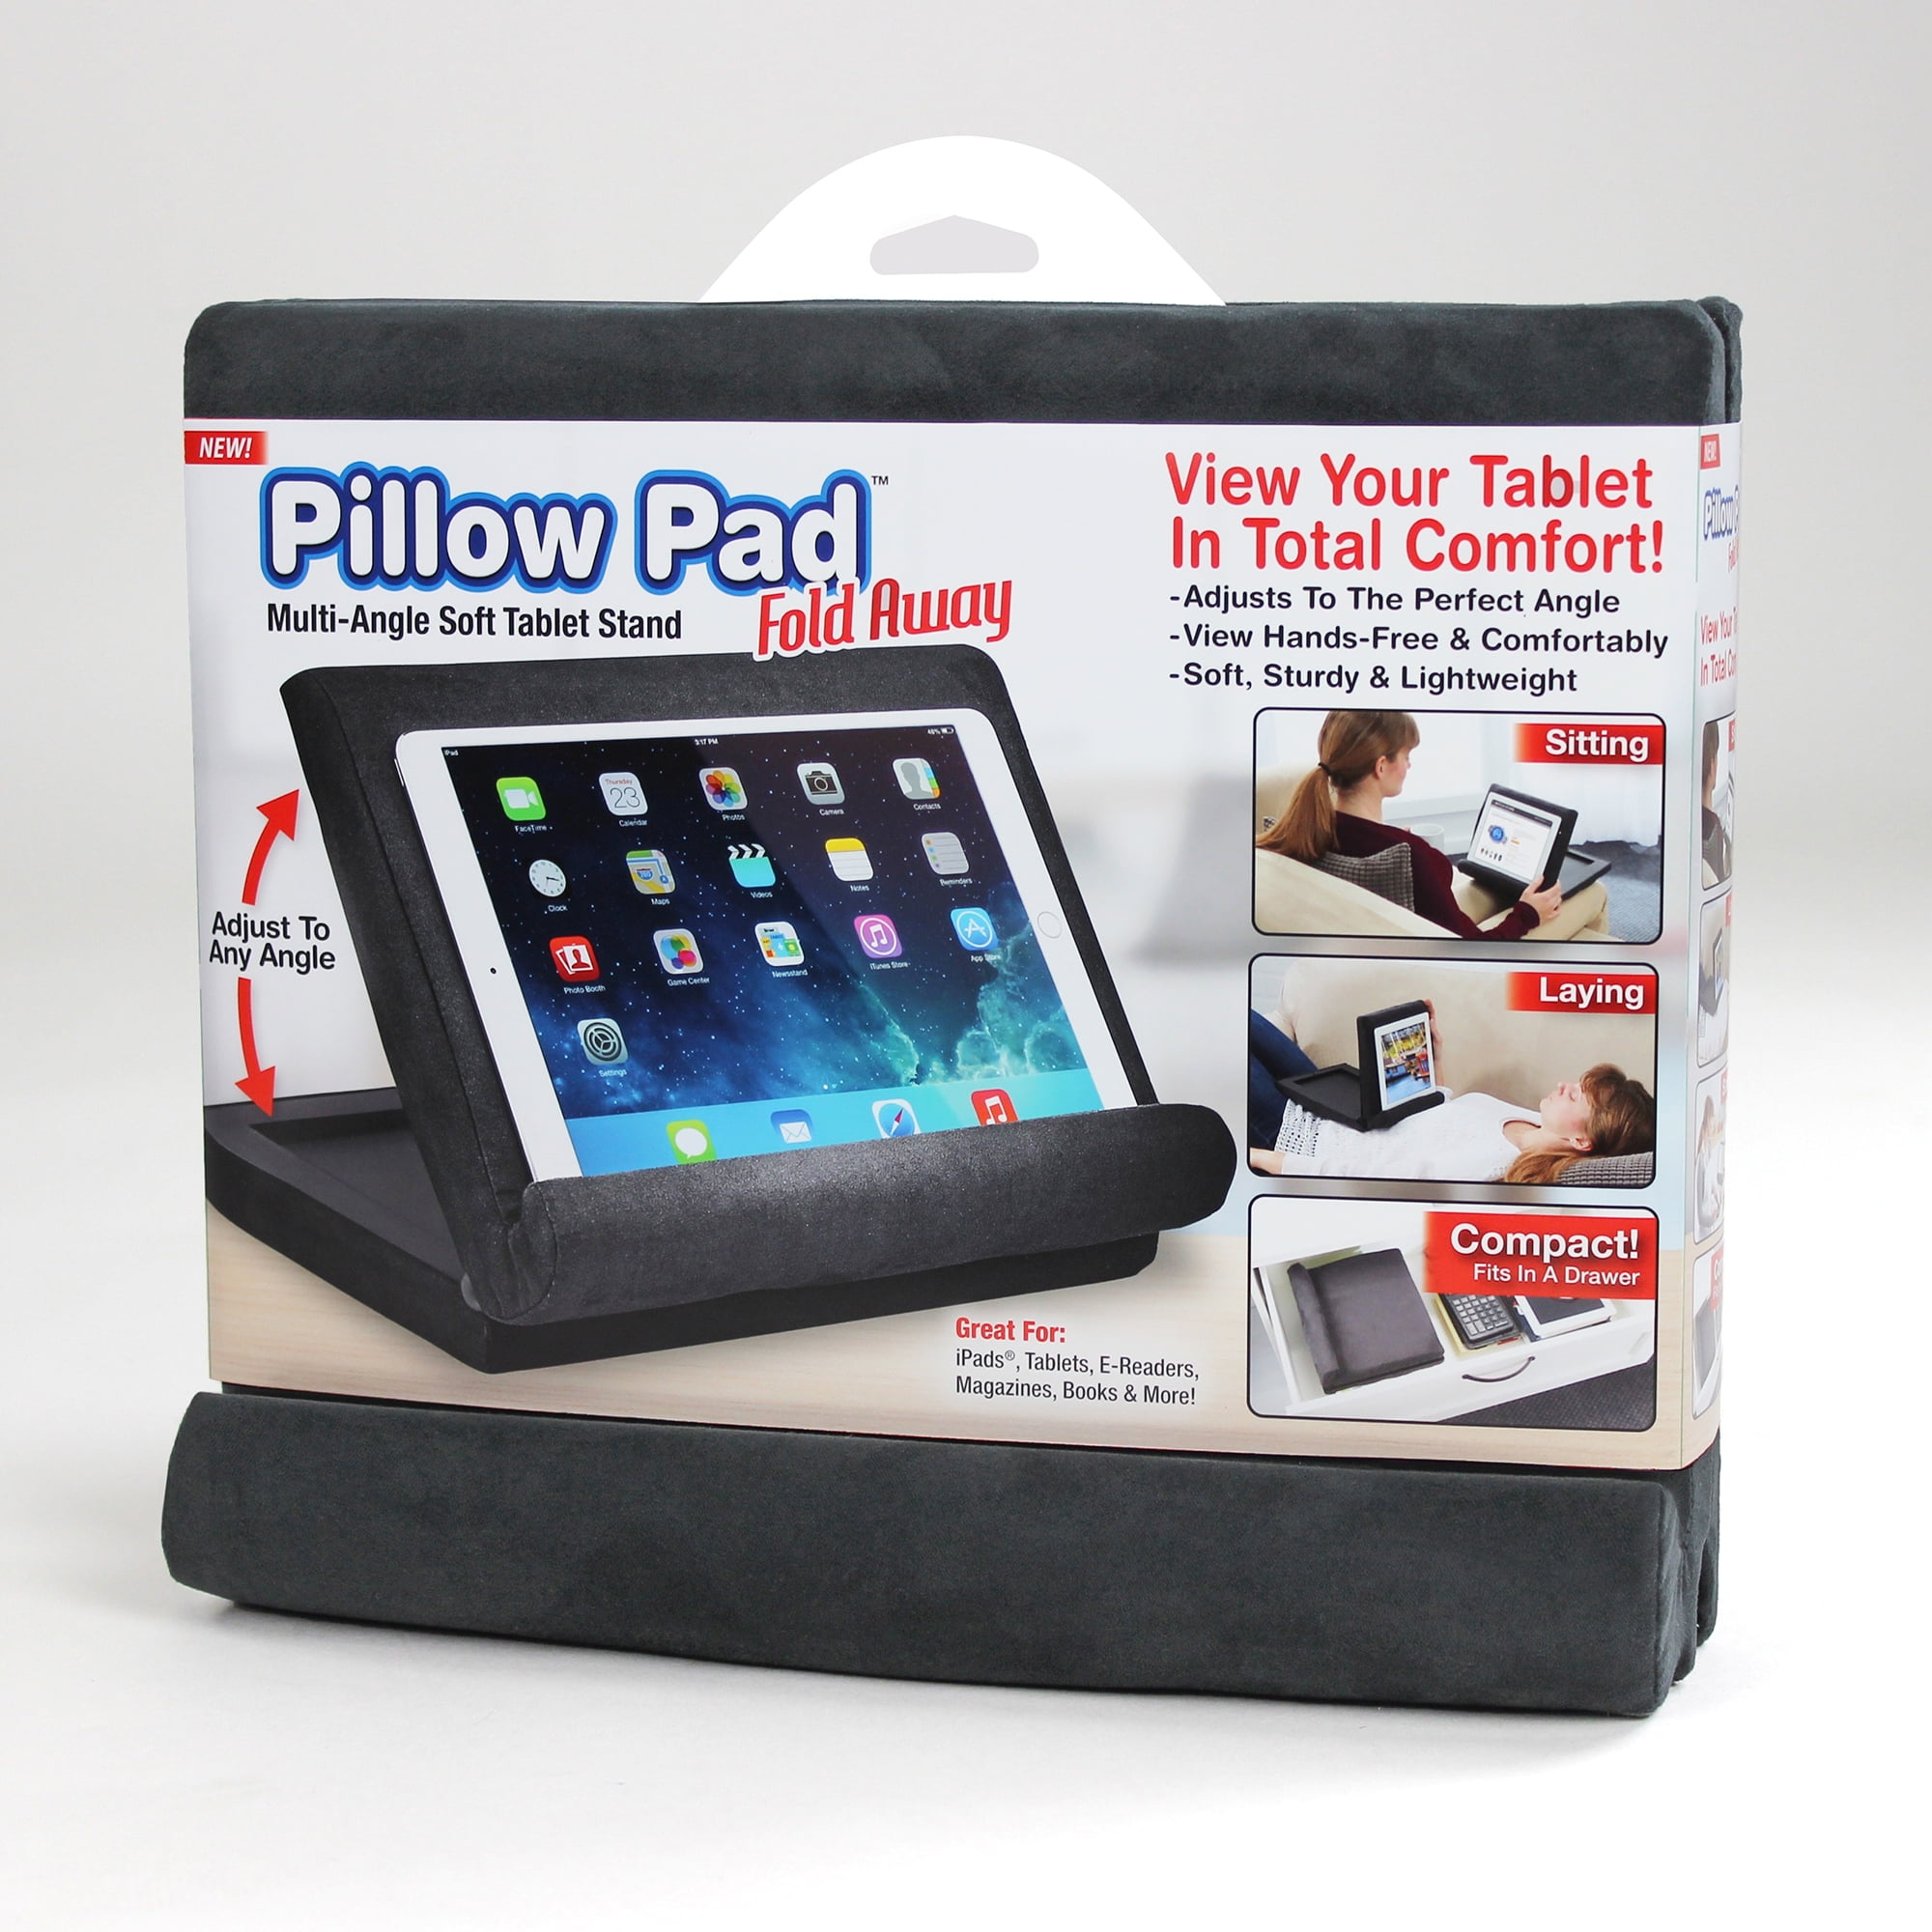 Picture of Pillow Pad 6047880 Fold Away Tablet Holder